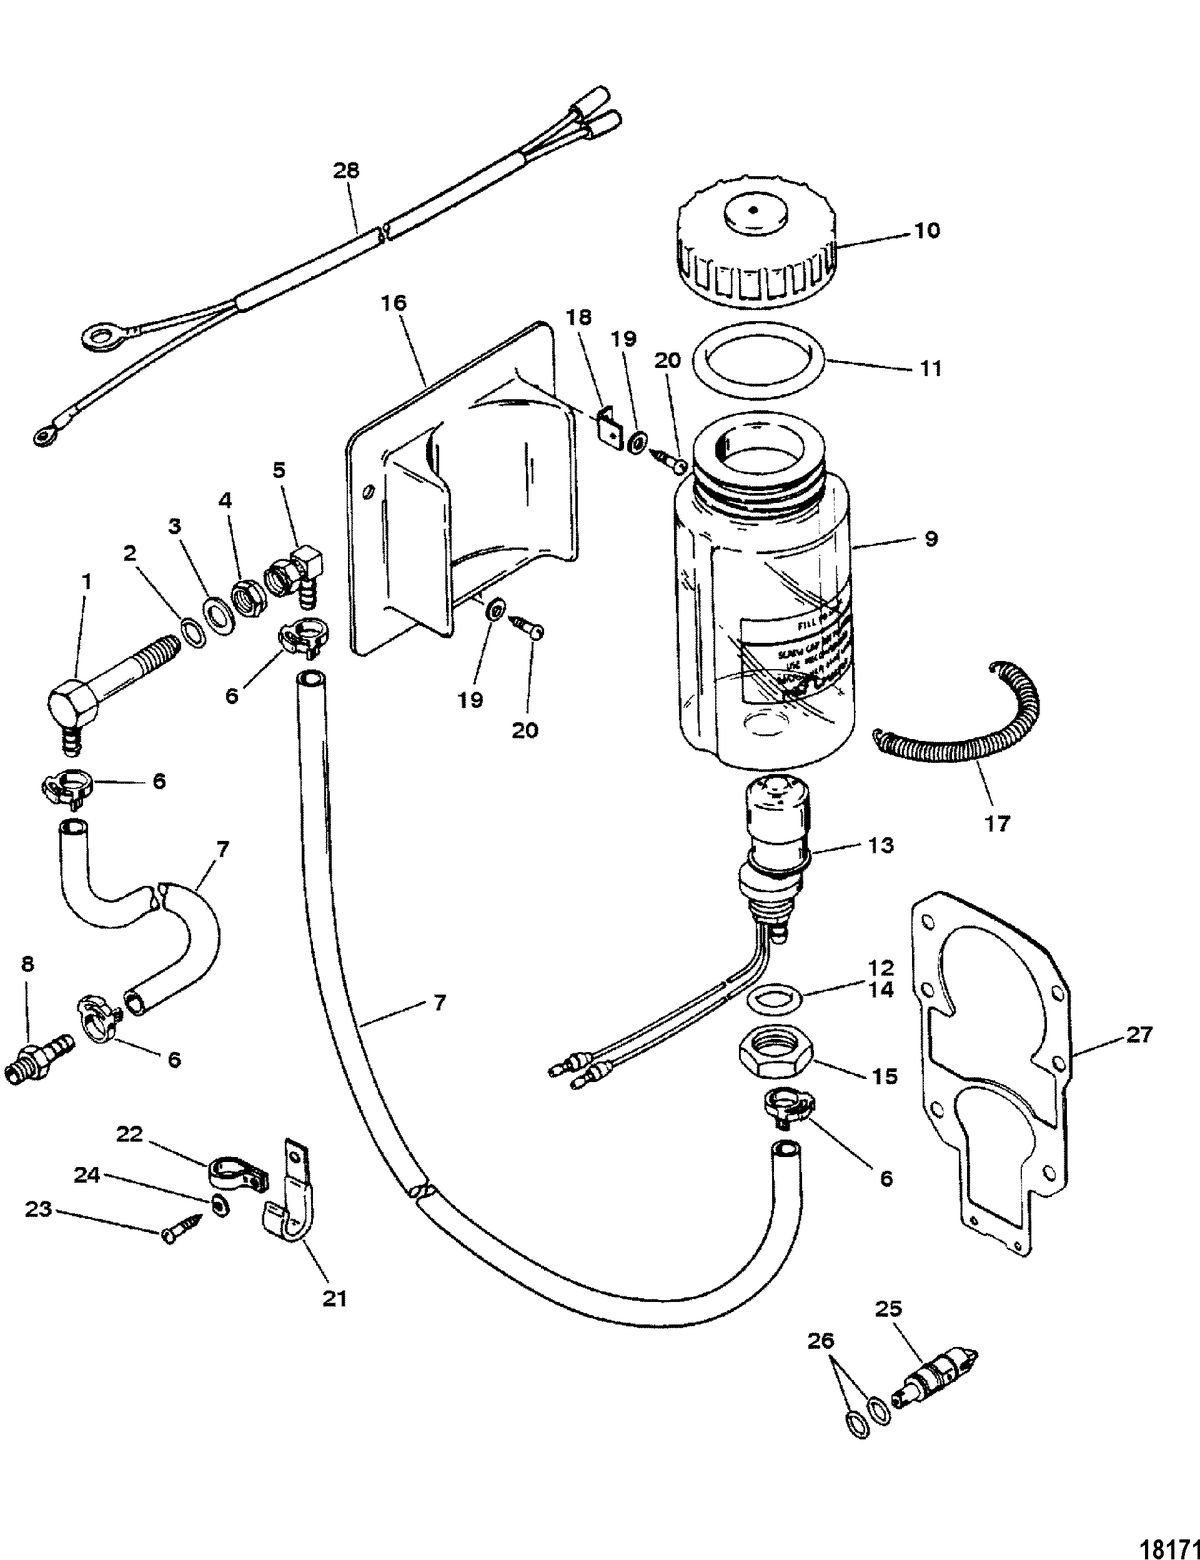 ACCESSORIES FUEL/OIL TANKS, LINES, FILTER KITS AND CORROSION Oil Reservoir Kit(19743A 5)